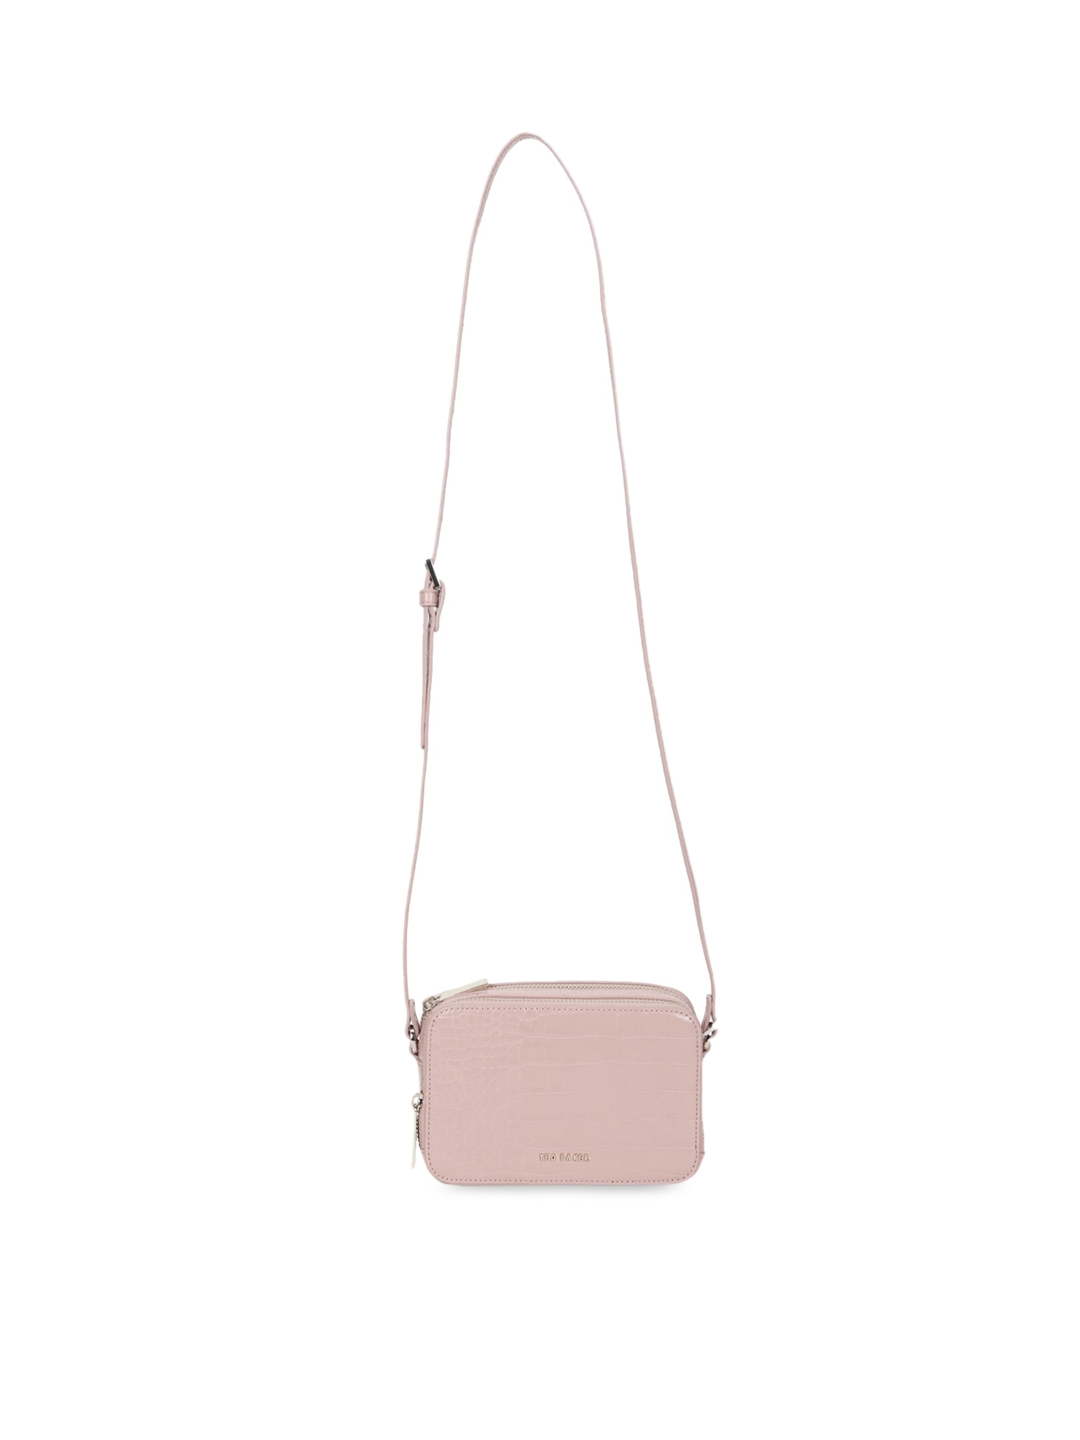 Ted Baker Pink Textured Leather Swagger Sling Bag